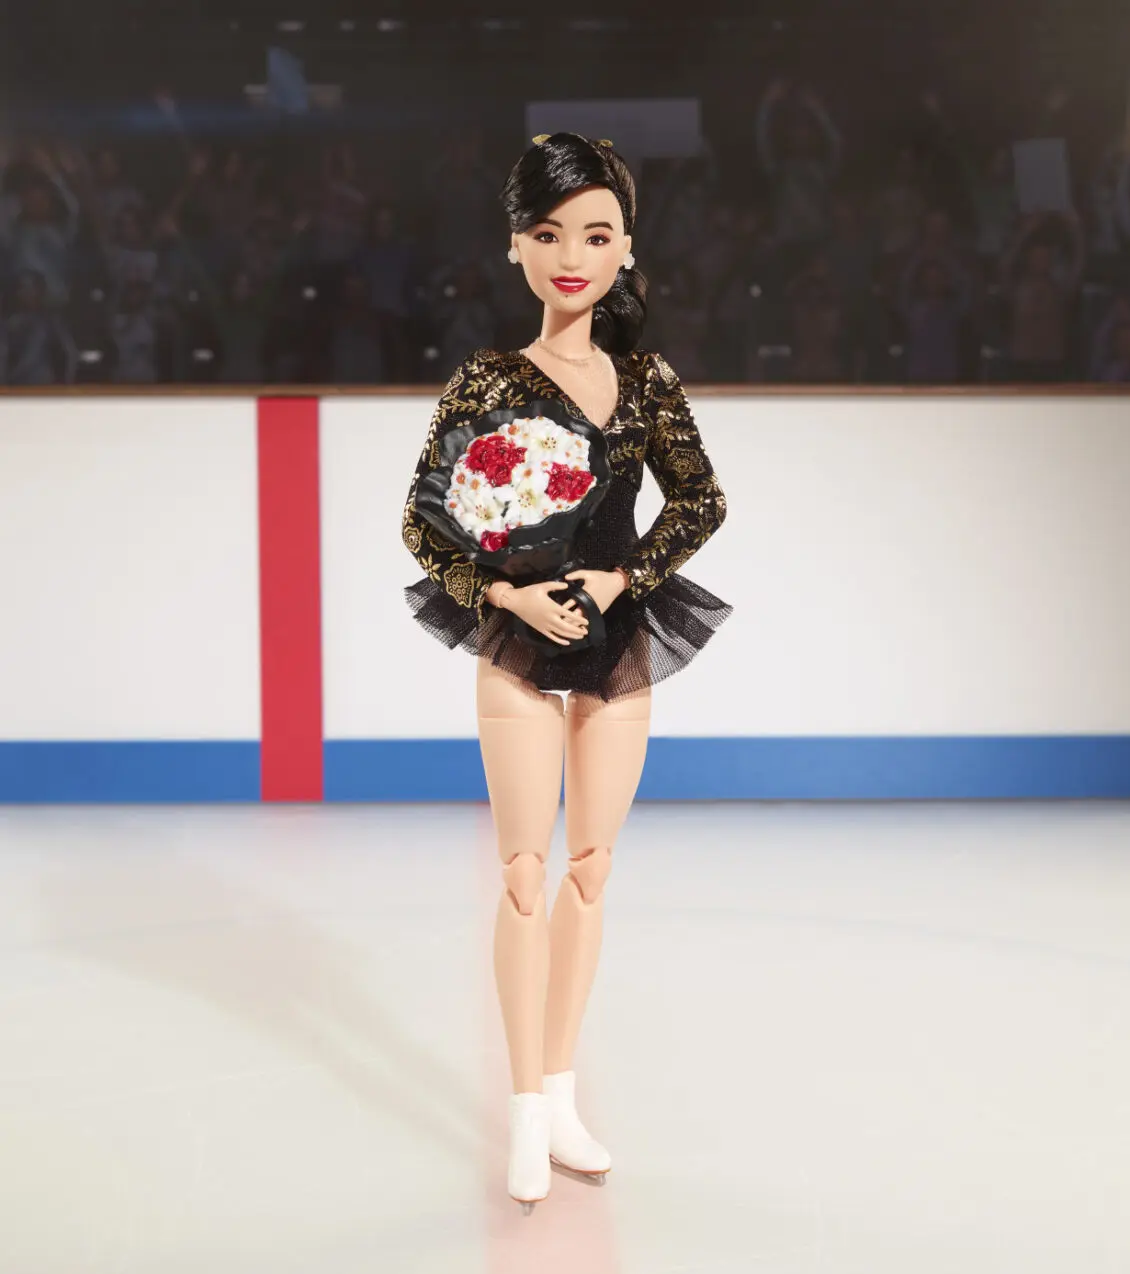 LA Post: Olympian Kristi Yamaguchi is 'tickled pink' to inspire a Barbie doll